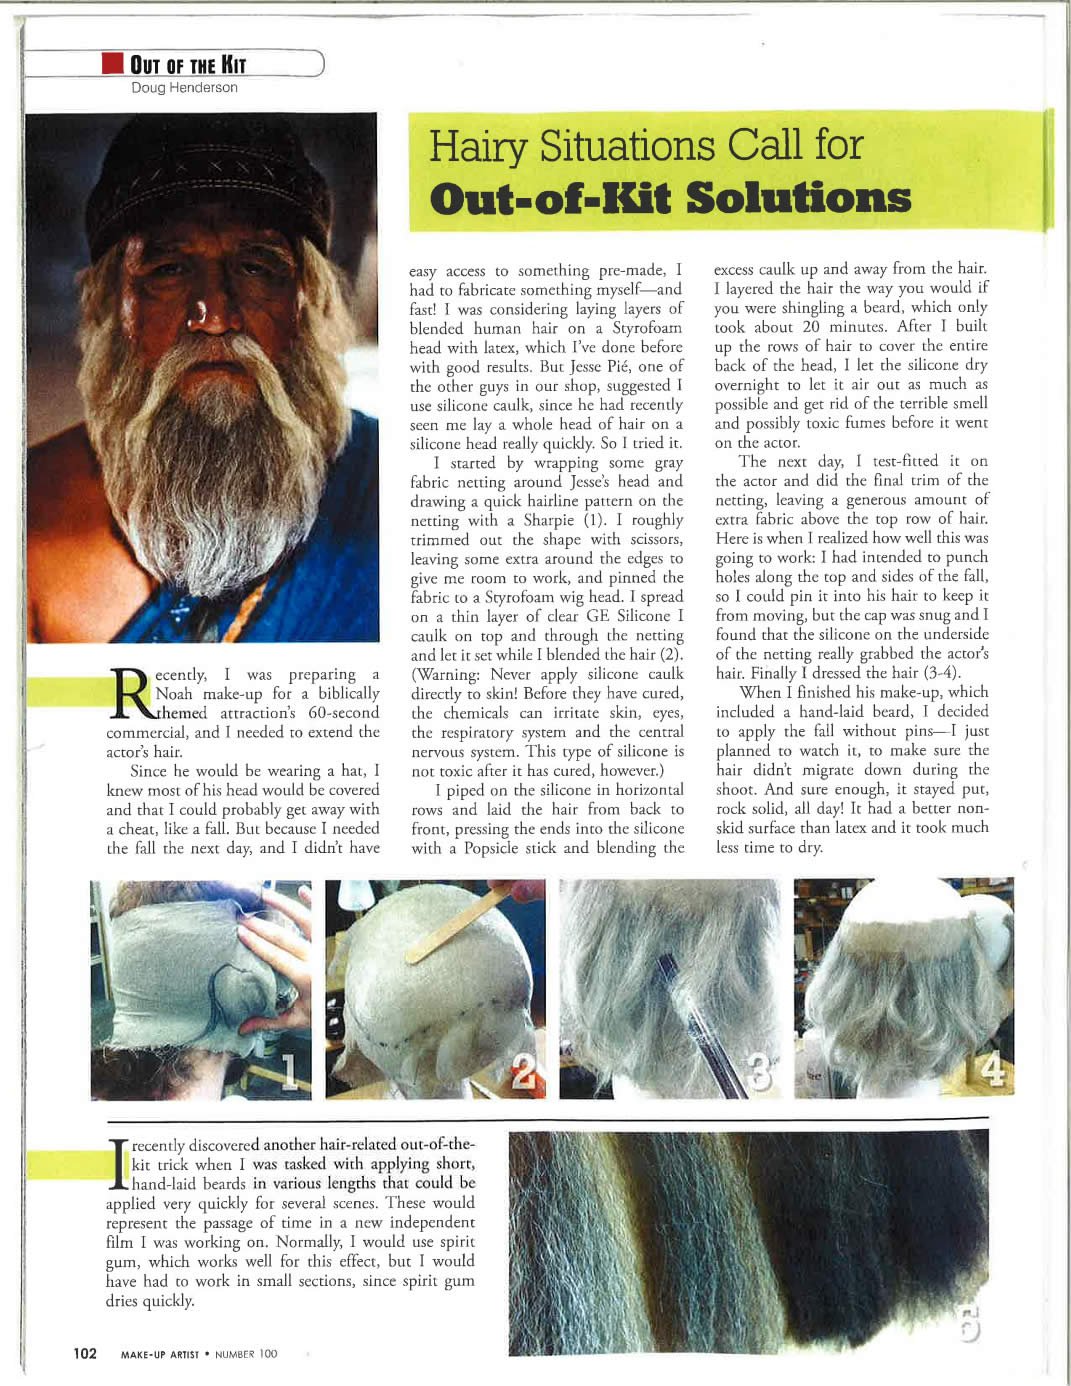 Article Page 1